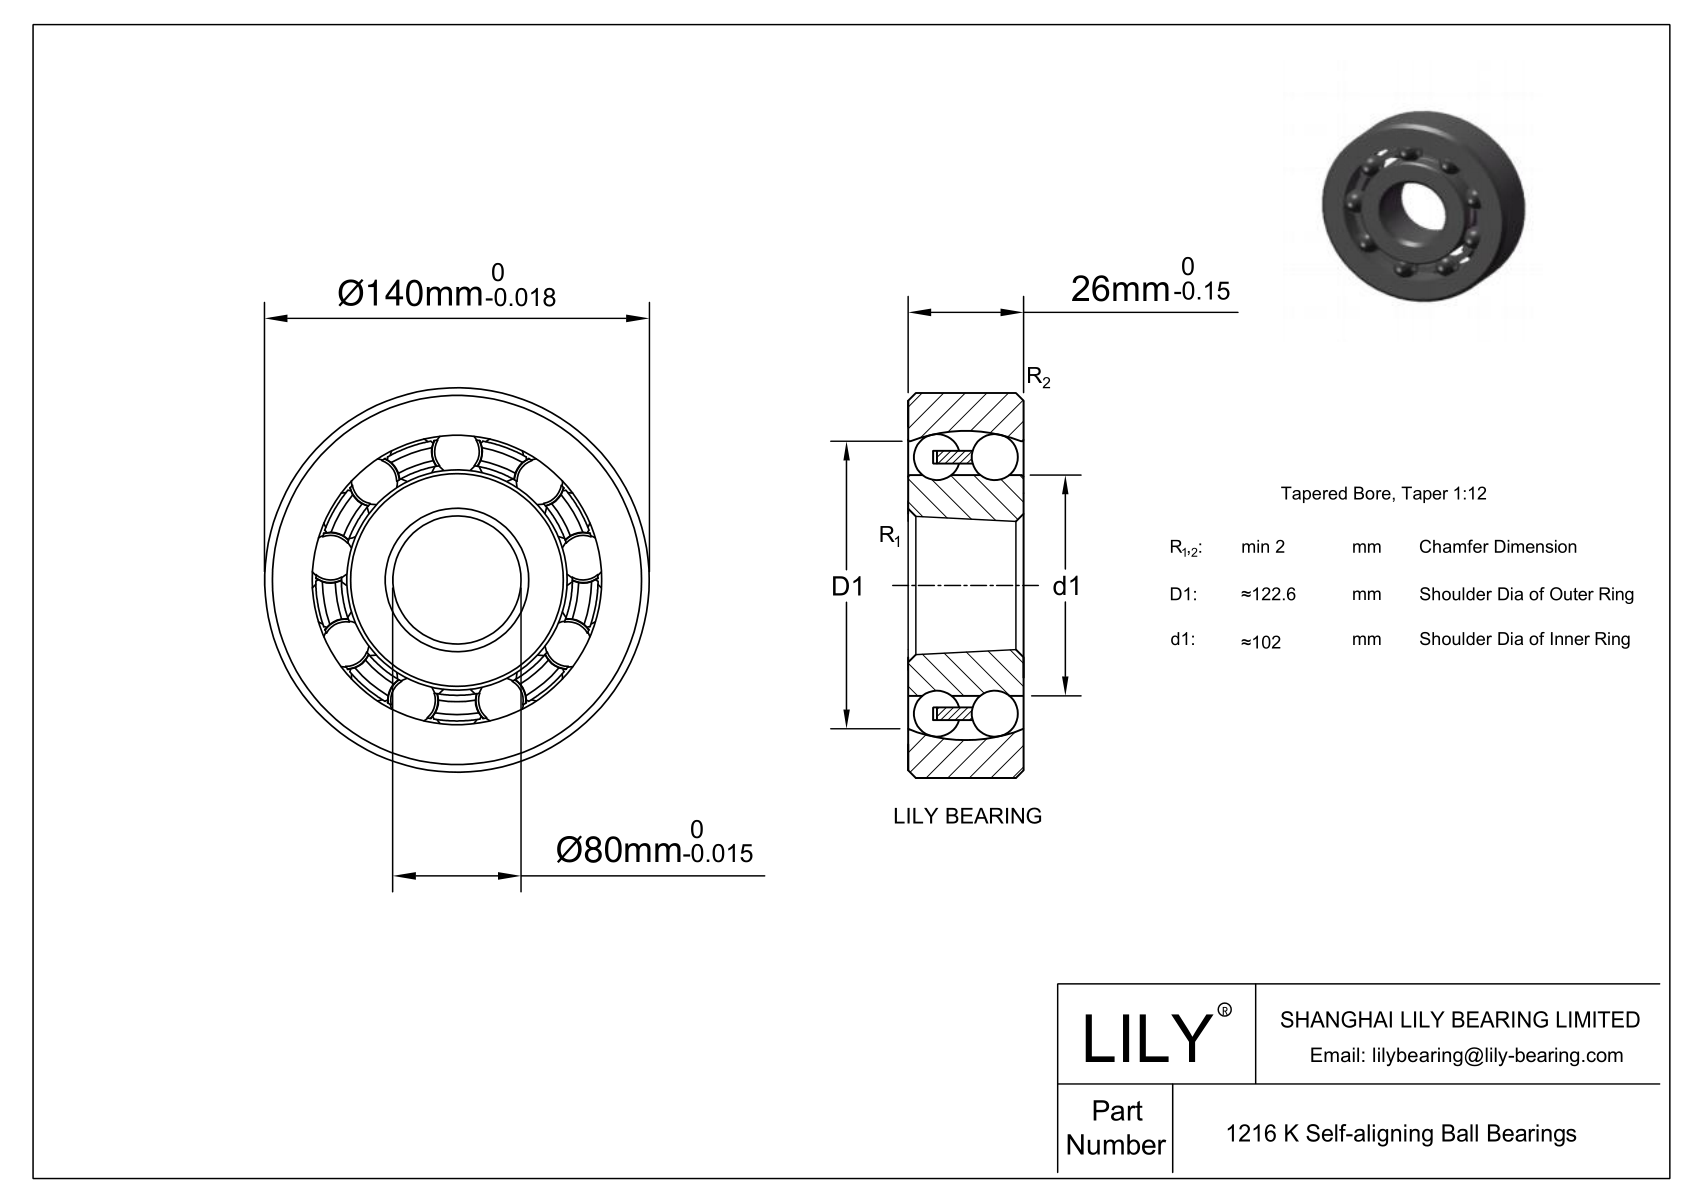 S1216 K Stainless Steel Self Aligning Ball Bearings cad drawing